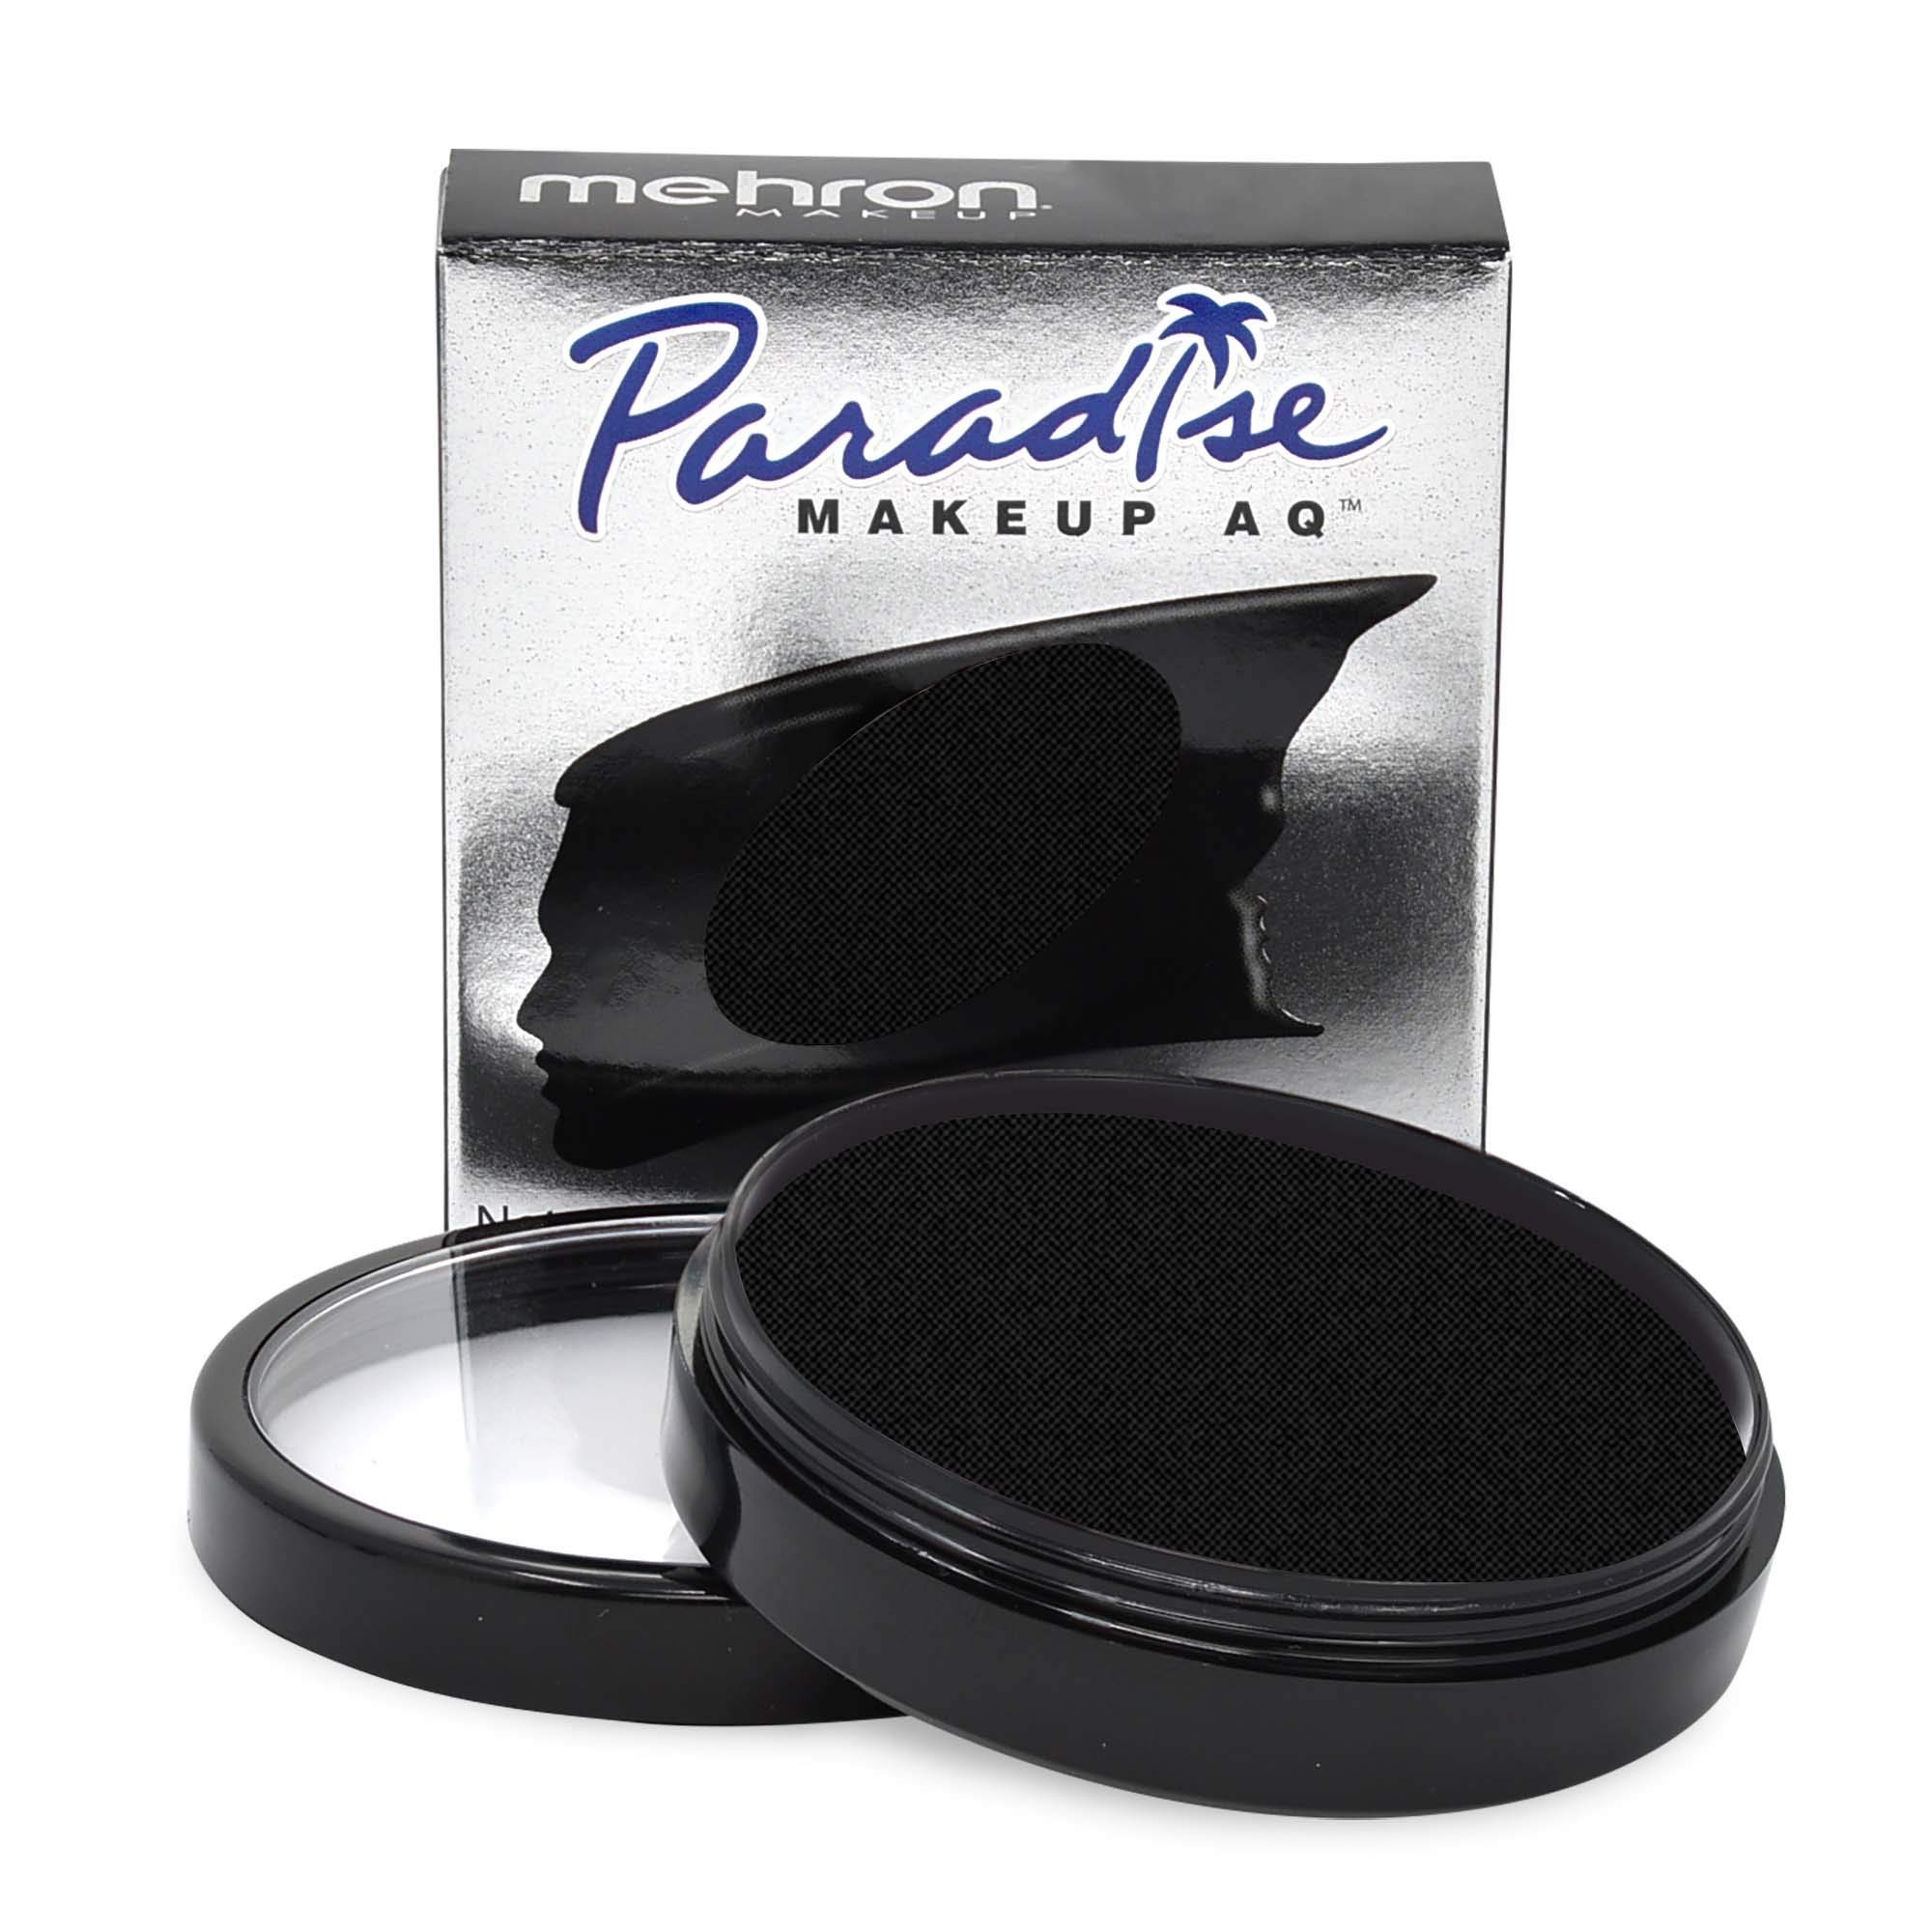 Mehron Makeup Paradise Makeup AQ Pro Size | Perfect for Stage & Screen Performance, Face & Body Painting, Special FX, Beauty, Cosplay, and Halloween | Water Activated Face Paint & Body Paint 1.4 oz (40 g) (Black)